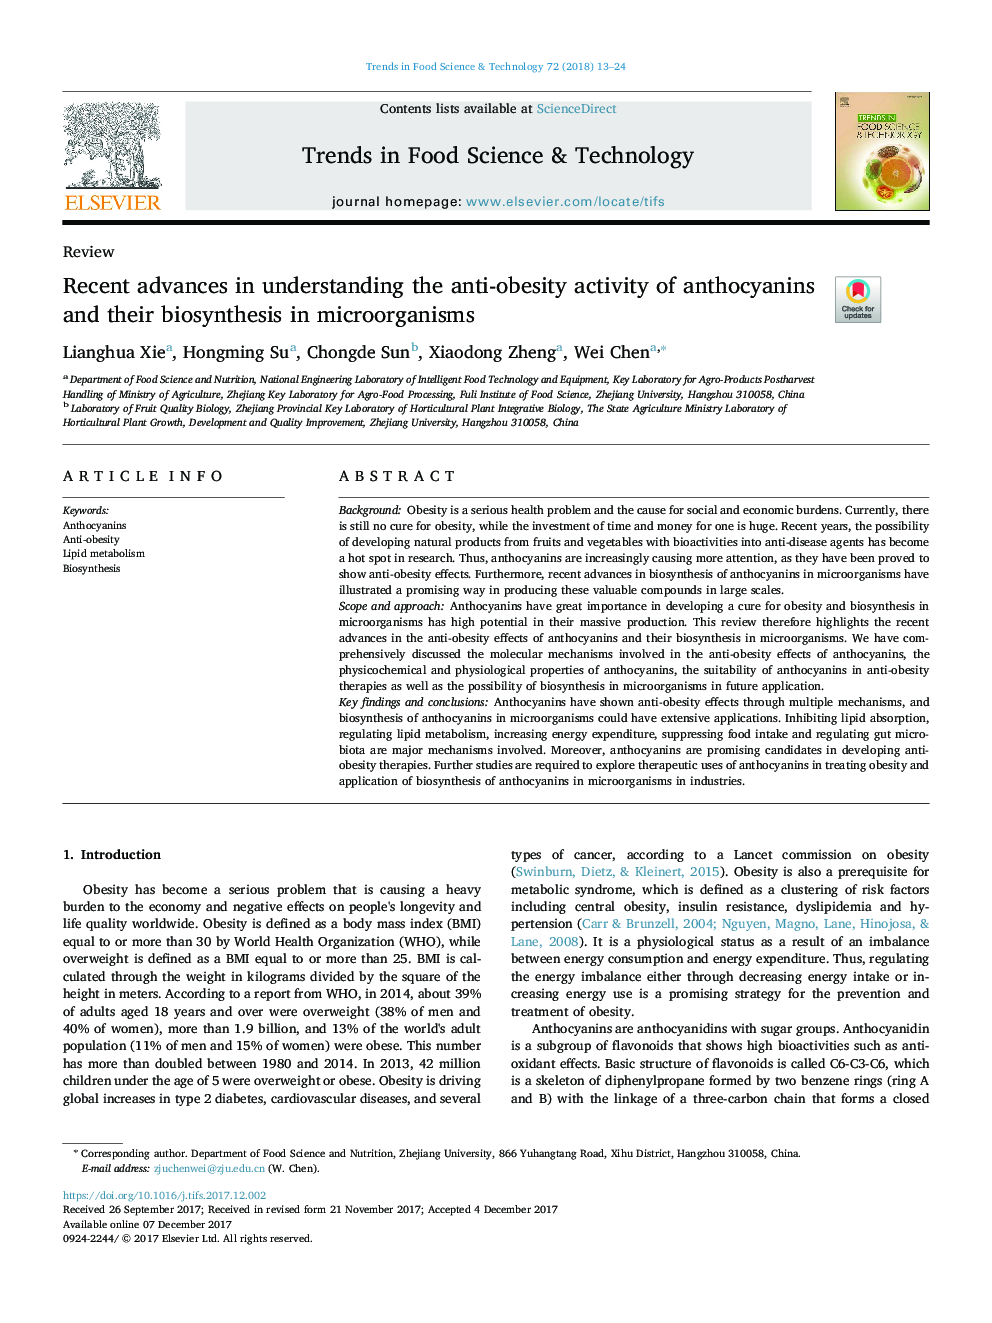 Recent advances in understanding the anti-obesity activity of anthocyanins and their biosynthesis in microorganisms